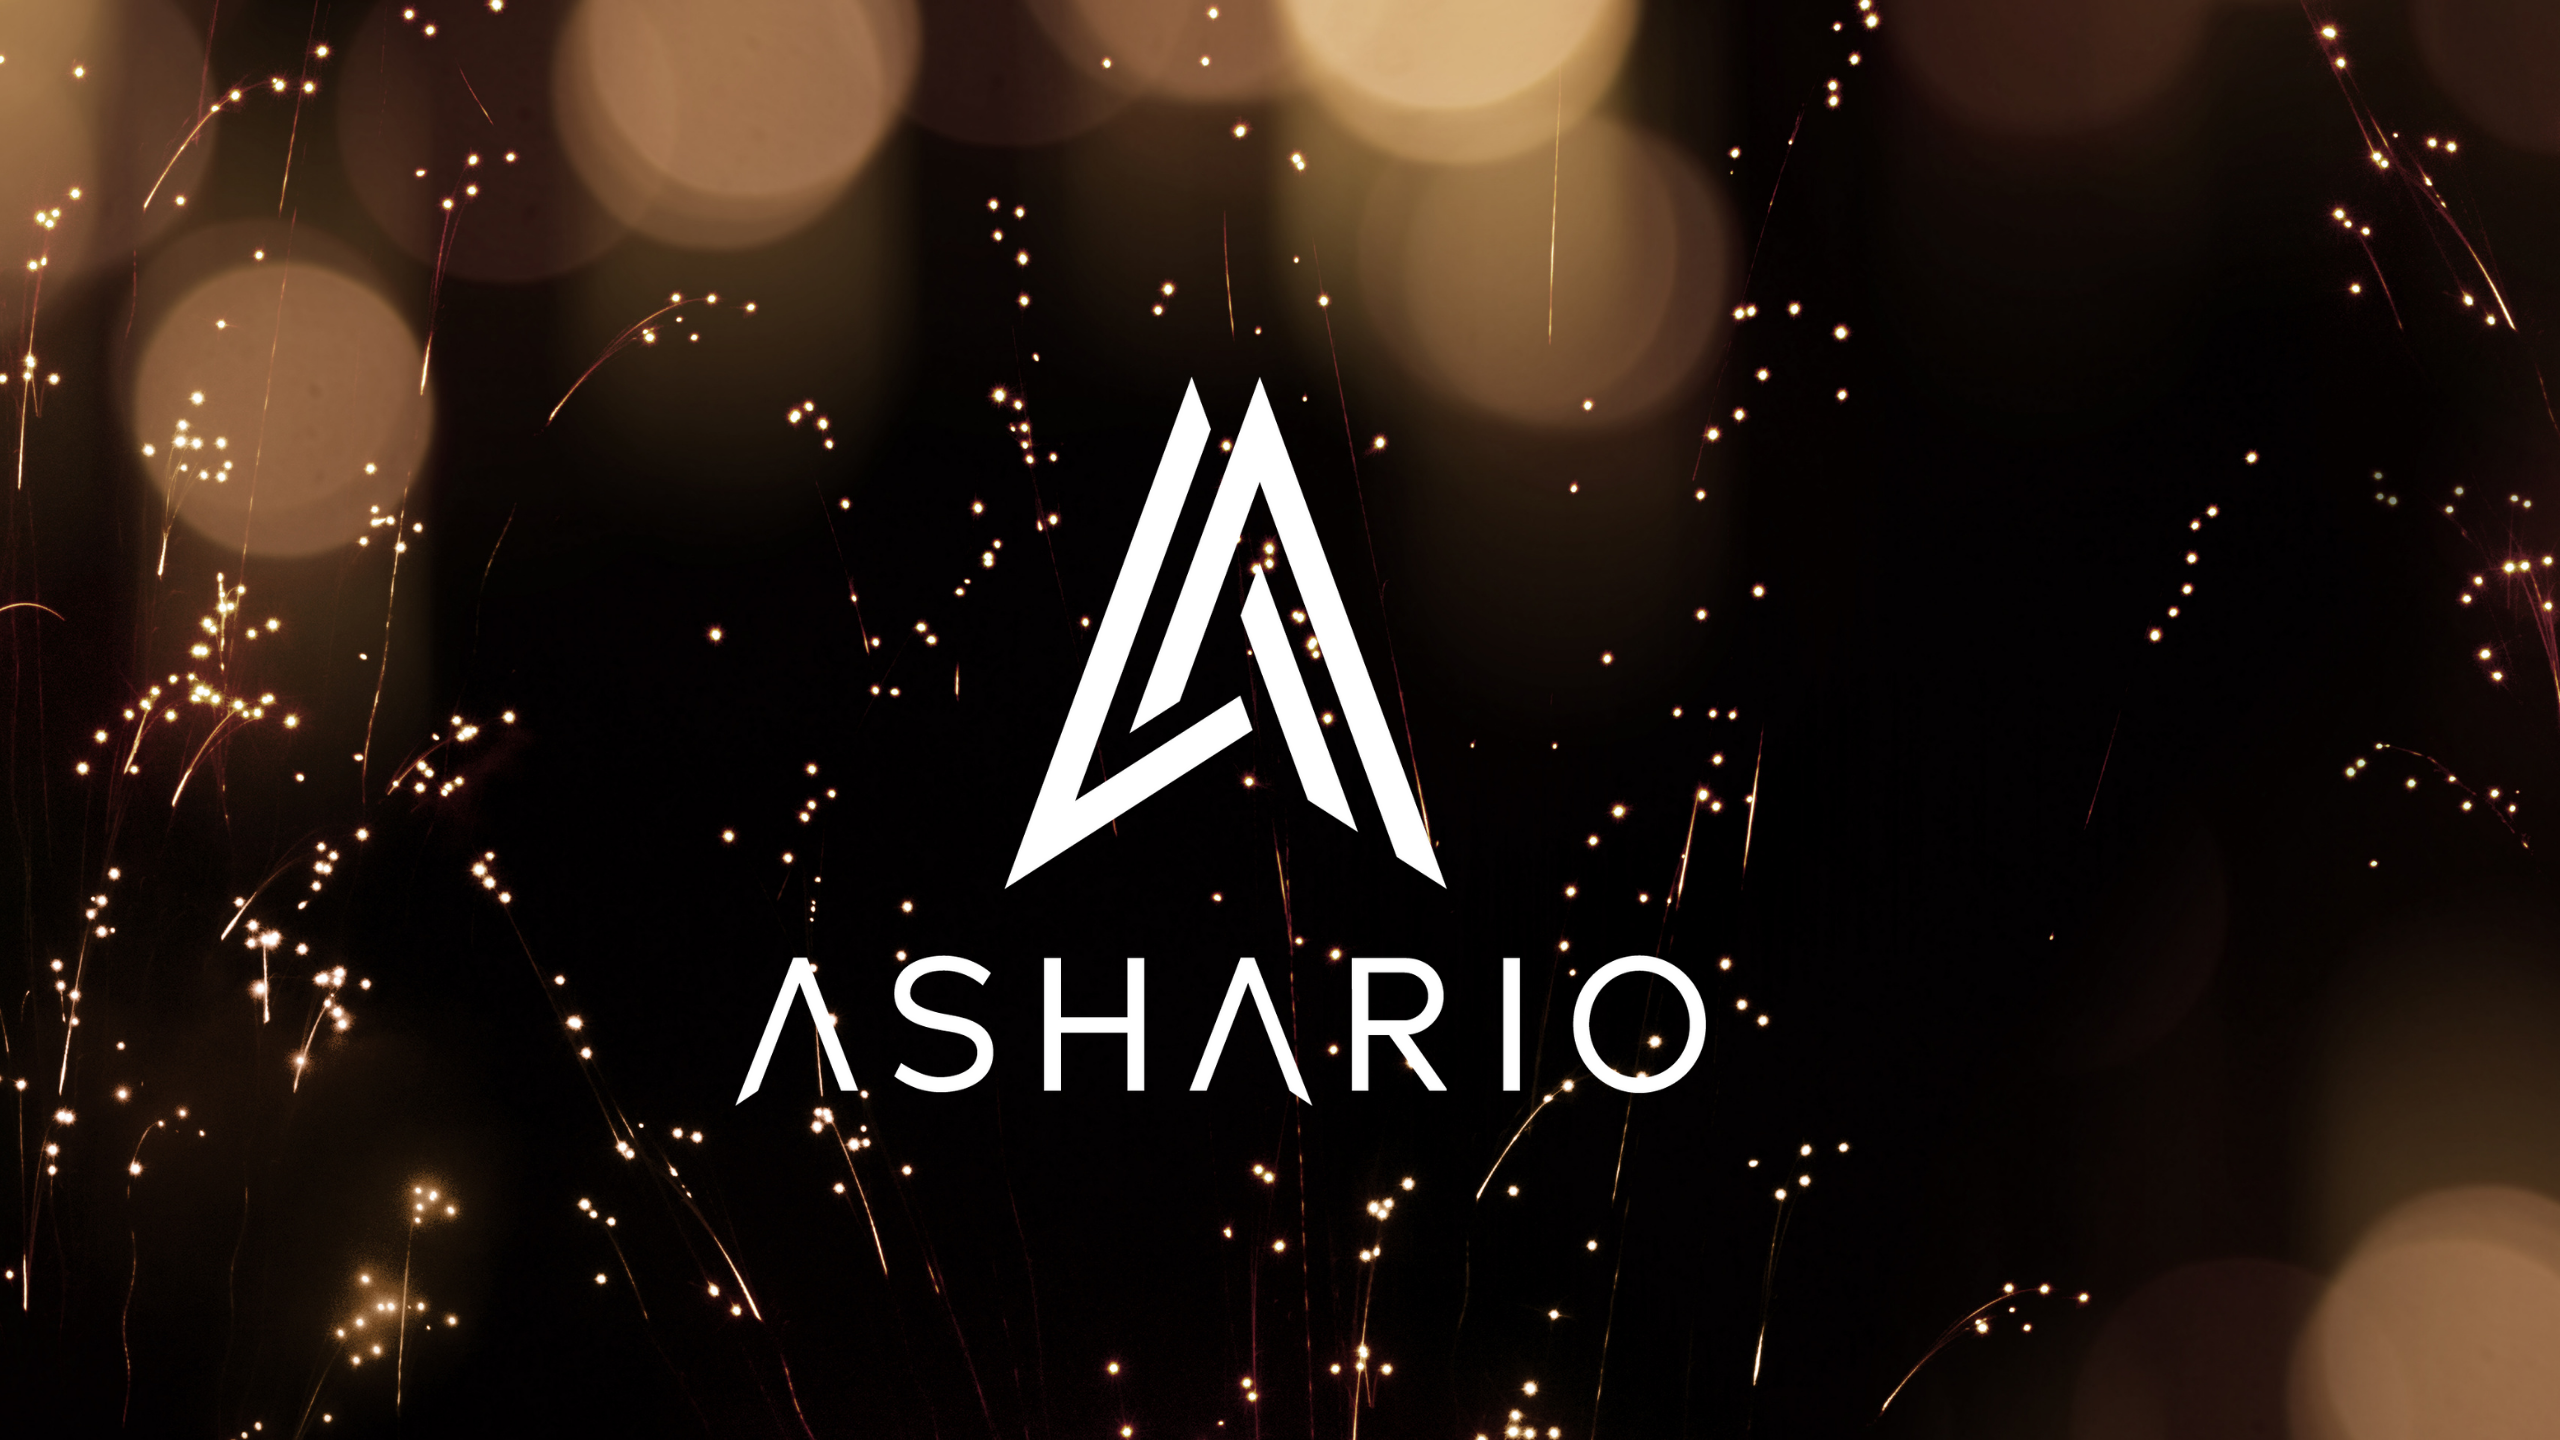 Join us for exciting cannabis events in North York, hosted by Ashario Cannabis! Whether you're a seasoned enthusiast or new to the scene, our events offer something for everyone.